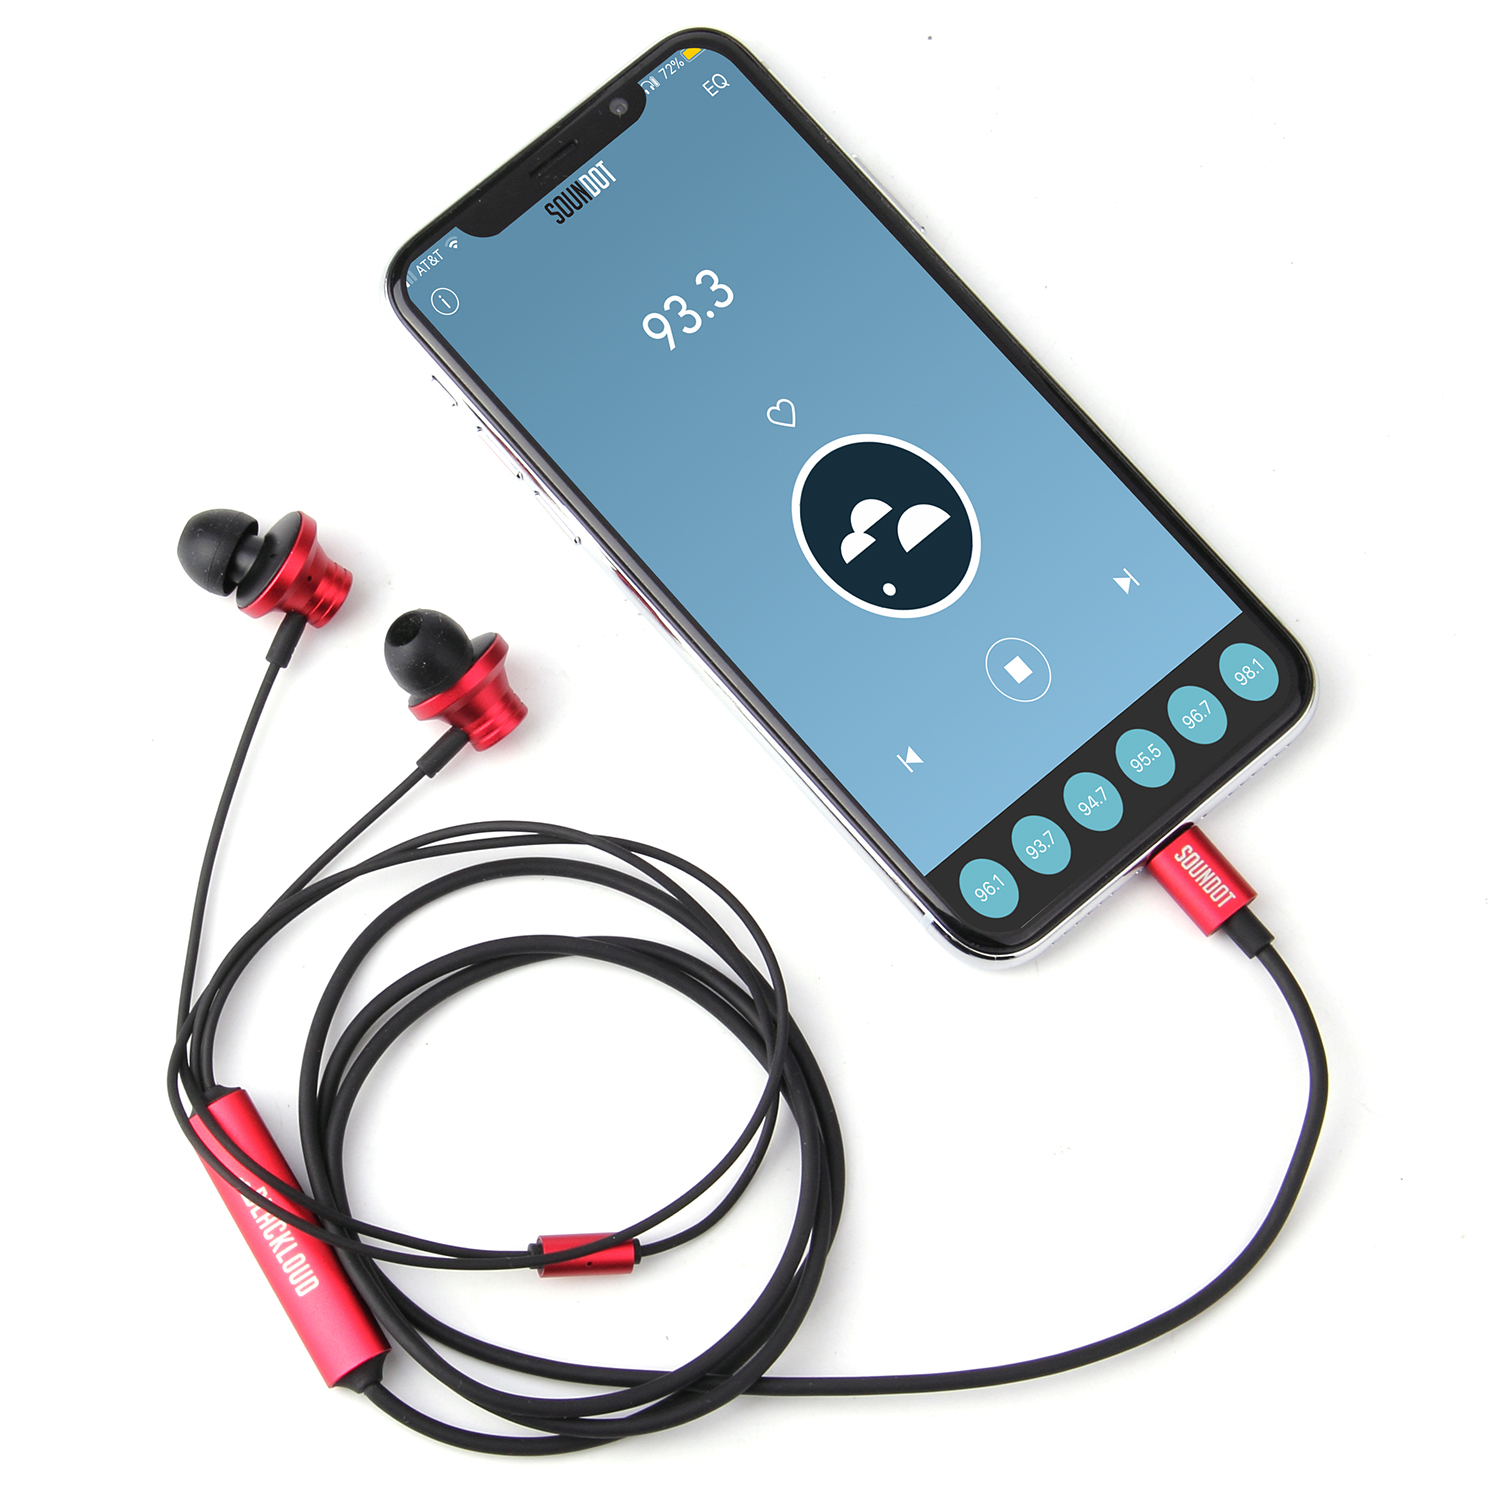 Built-in FM receiver lets users who may lack internet tune directly into FM radio to listen live and compression free to sports, music, weather and even emergency broadcasts.